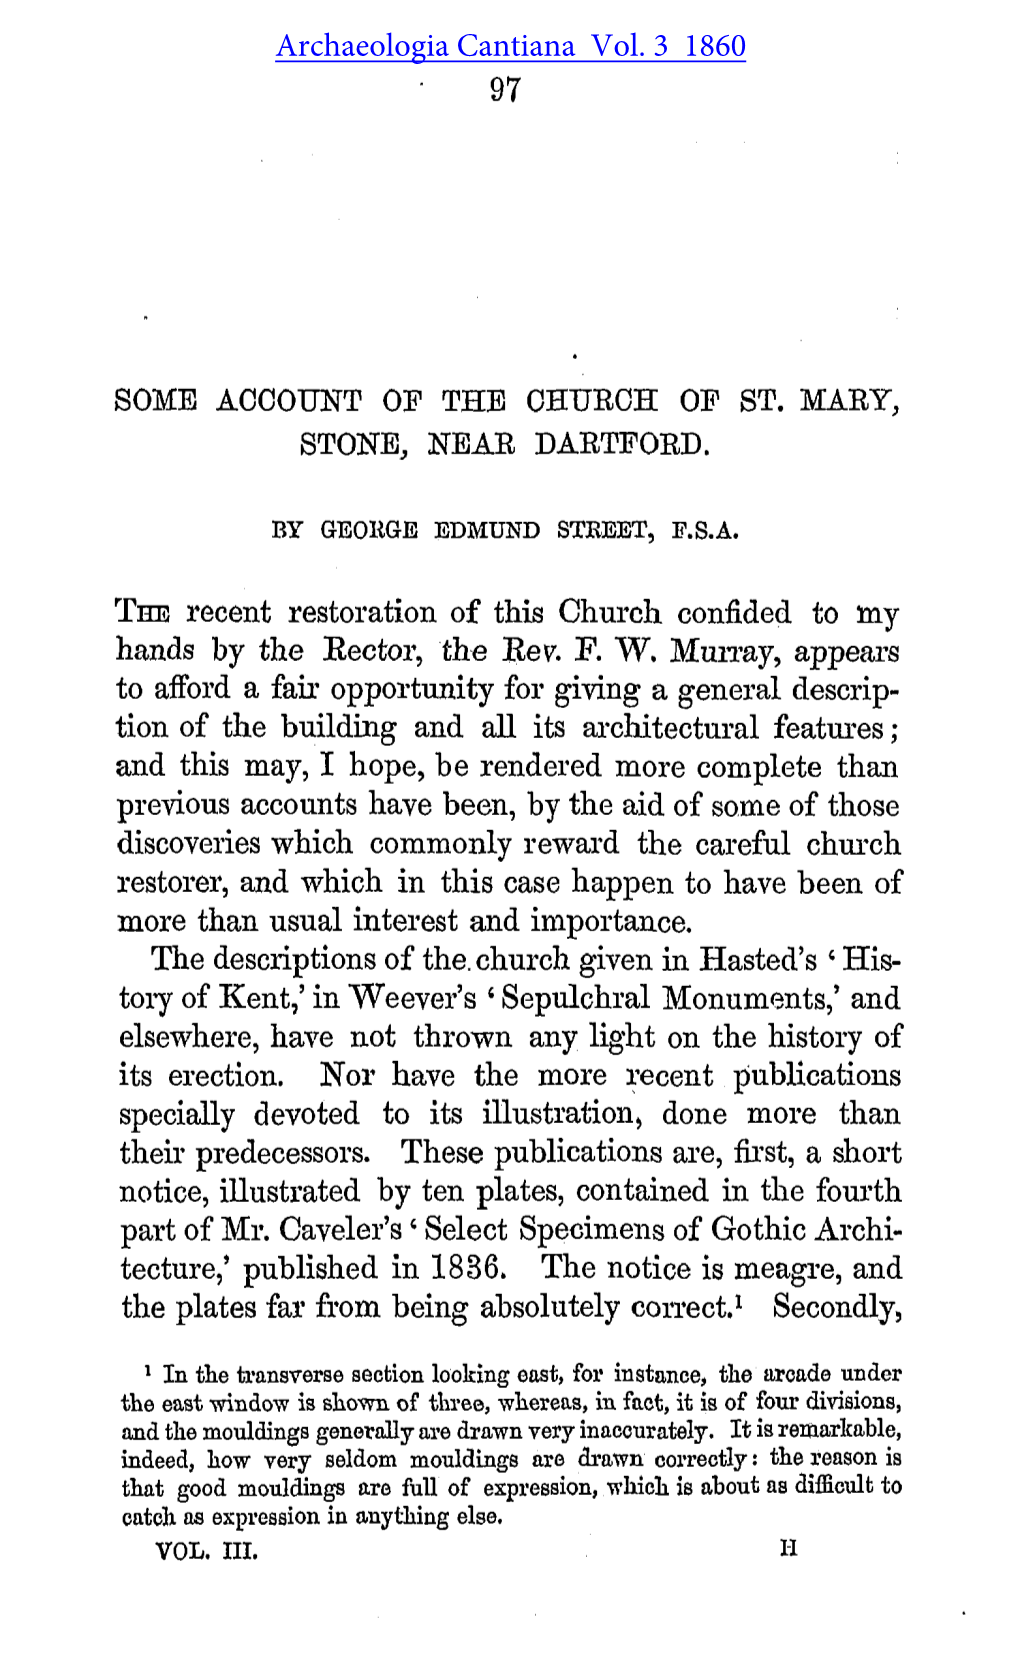 Some Account of the Church of St Mary, Stone Near Dartford